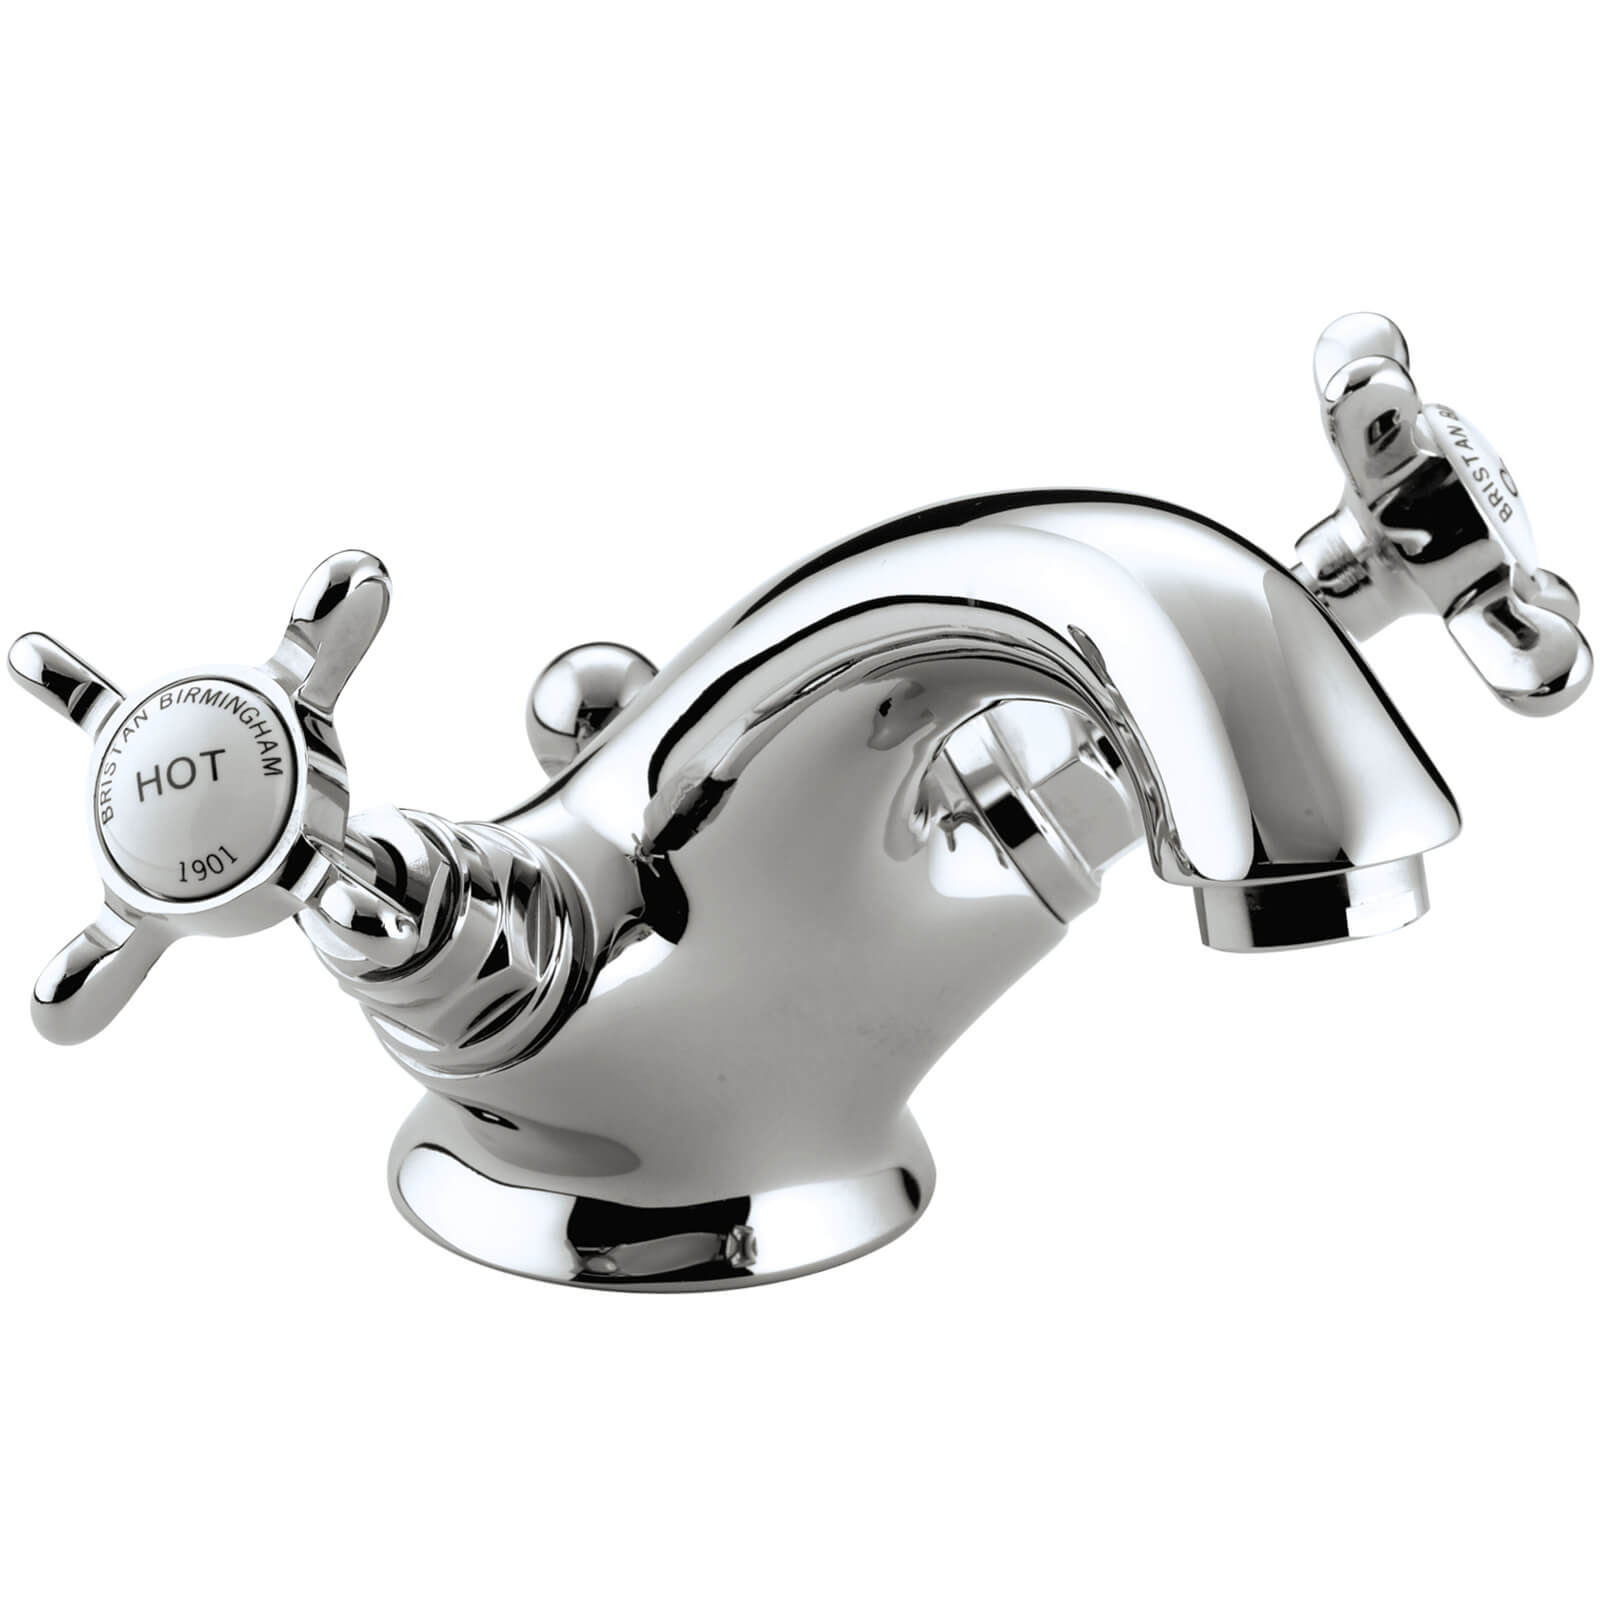 Bristan 1901 Traditional Basin Mixer Tap With Pop Up Waste N Bas C Cd